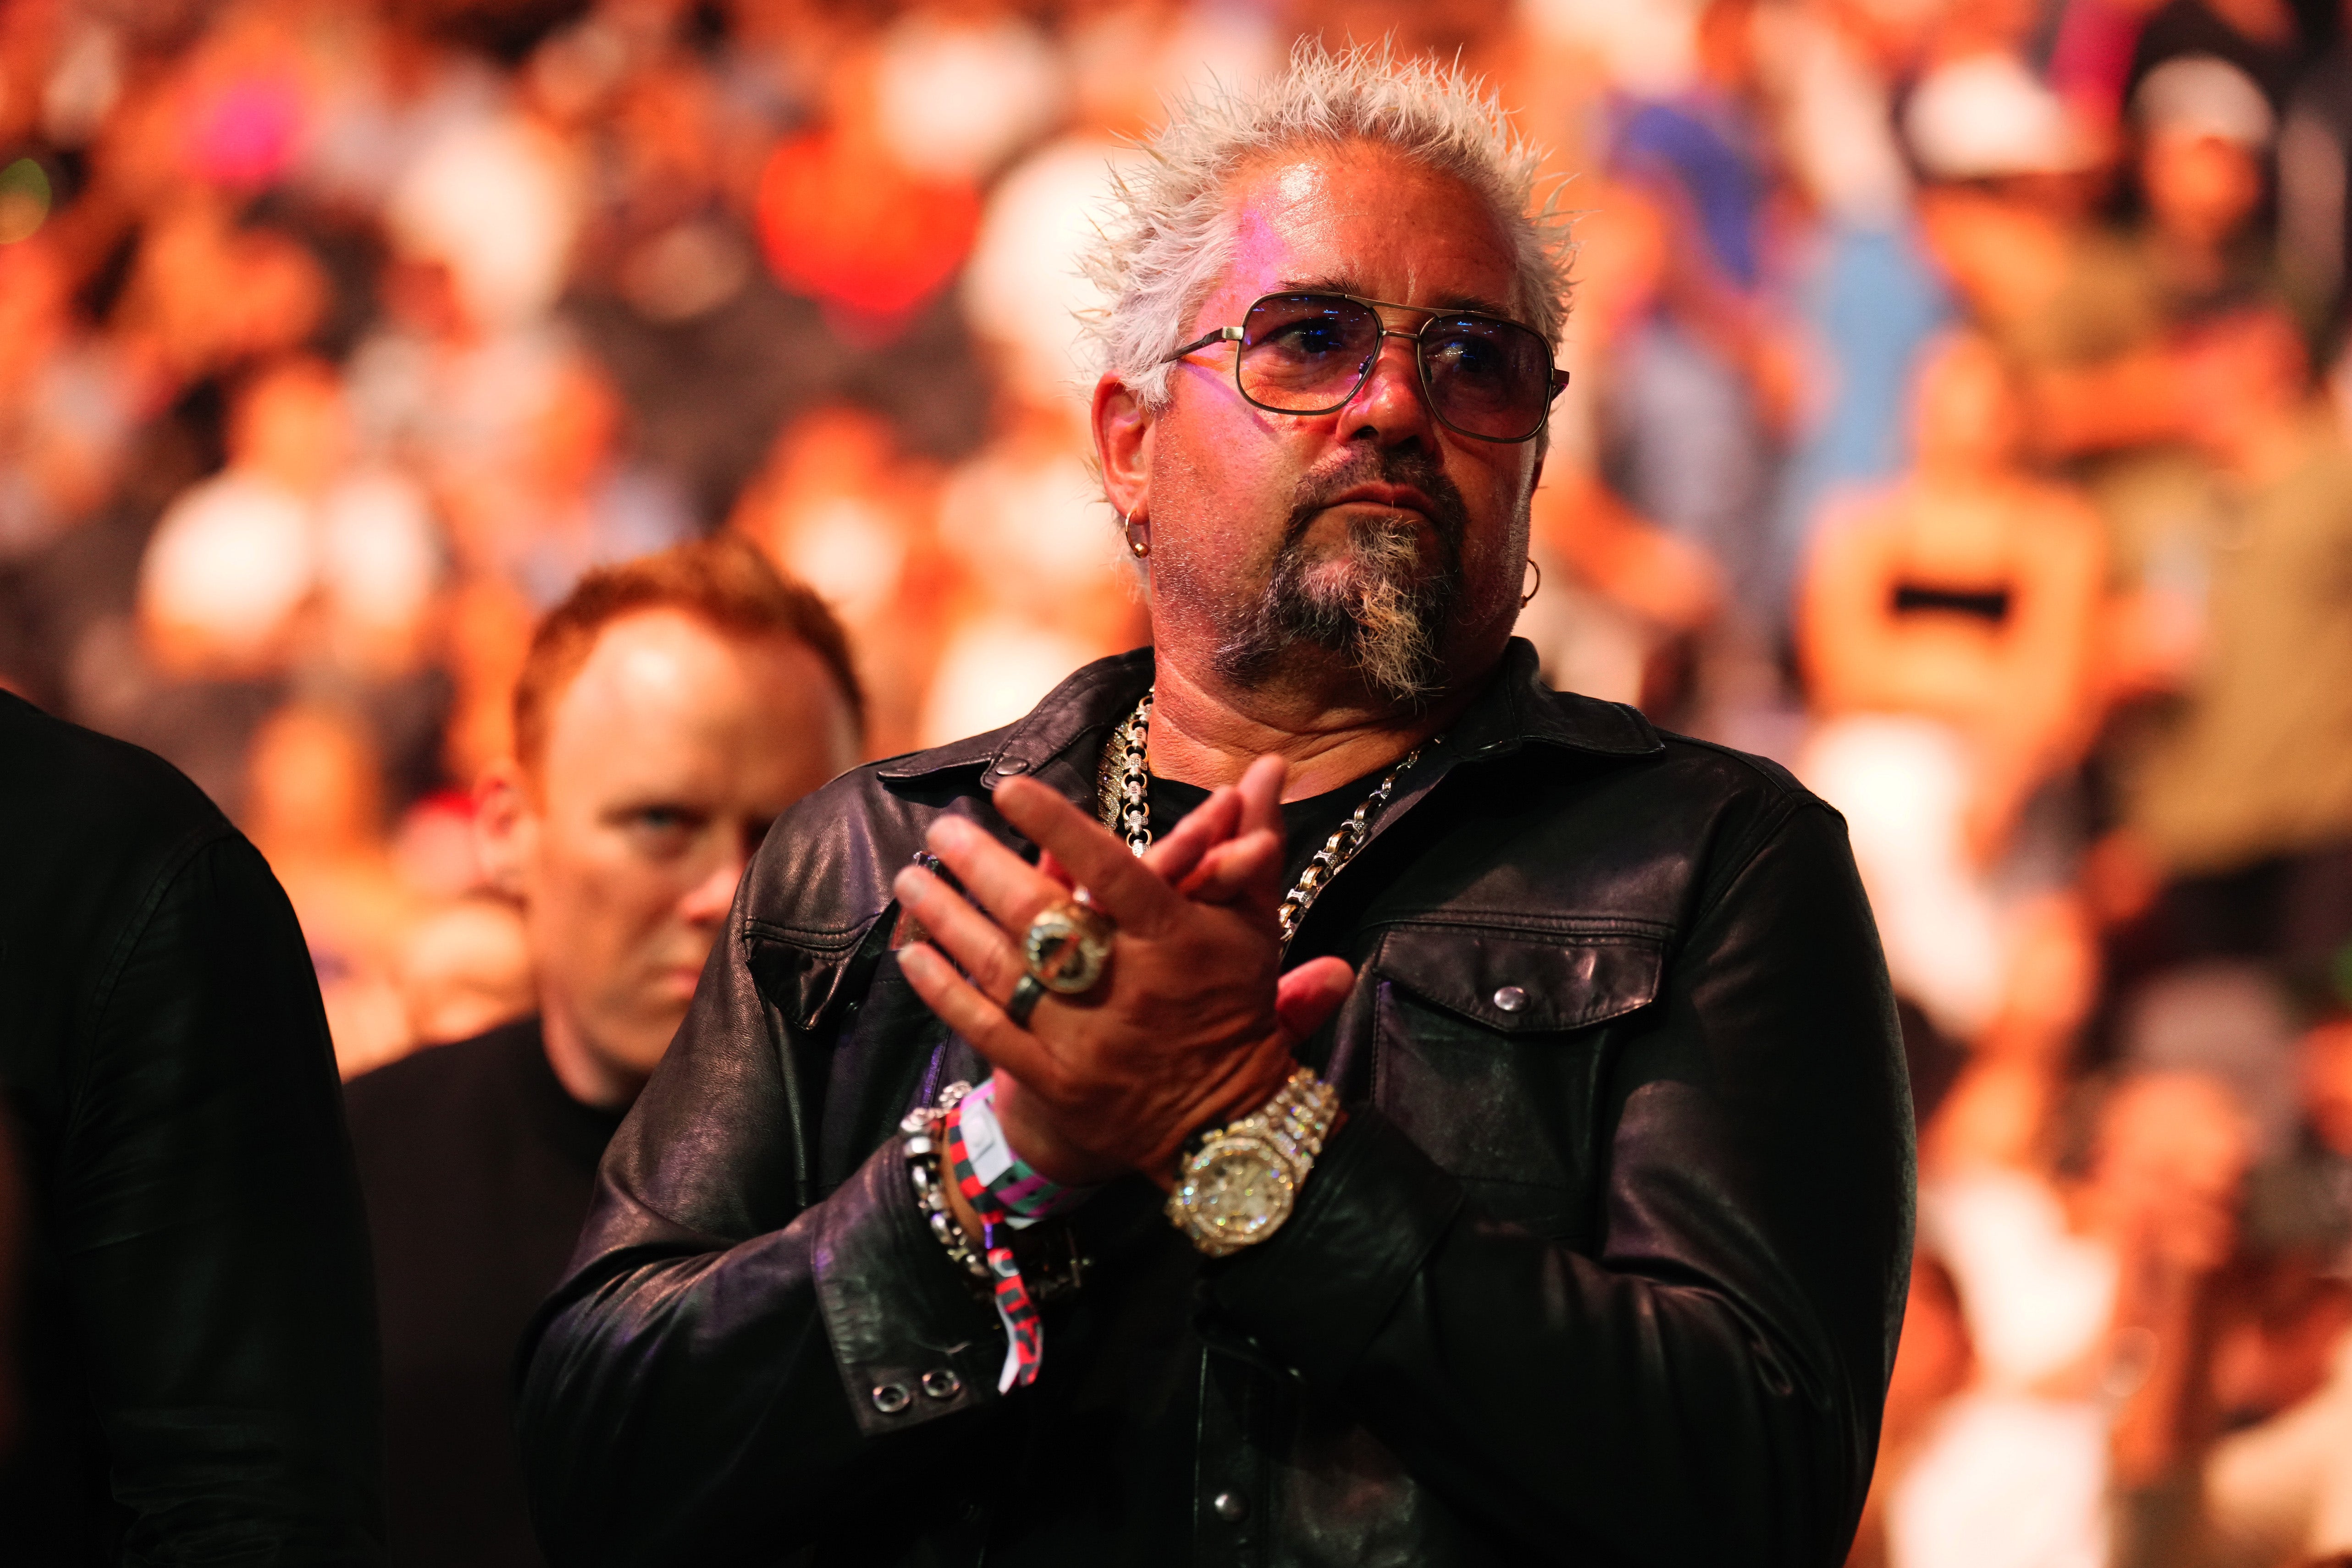 Guy Fieri reveals wake-up call after being falsely accused of drunk driving in fatal accident